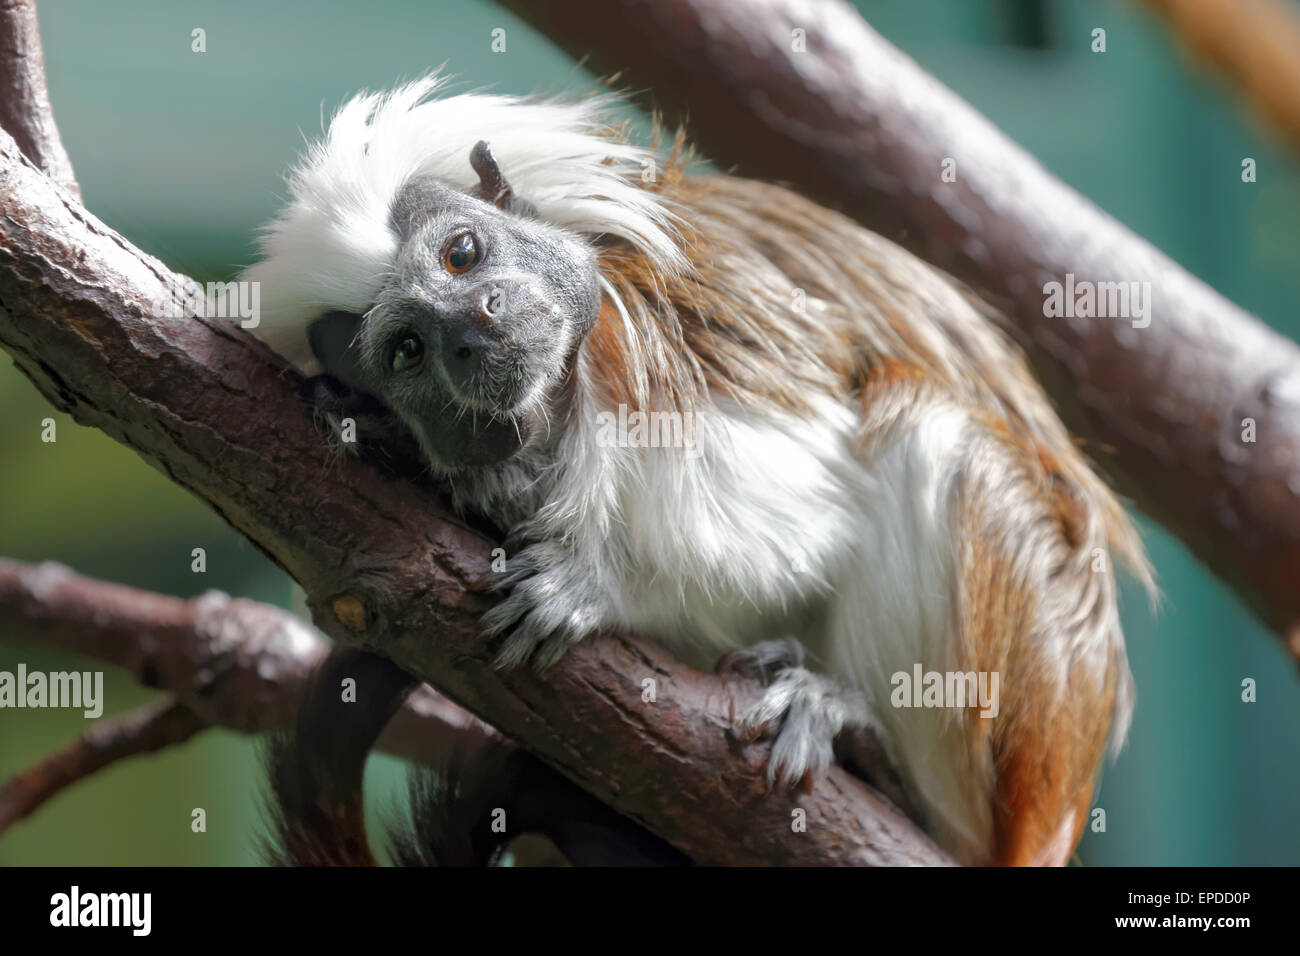 Cotton-top tamarin (Saguinus oedipus) is a small New World monkey weighing less than 0.5 kg Stock Photo